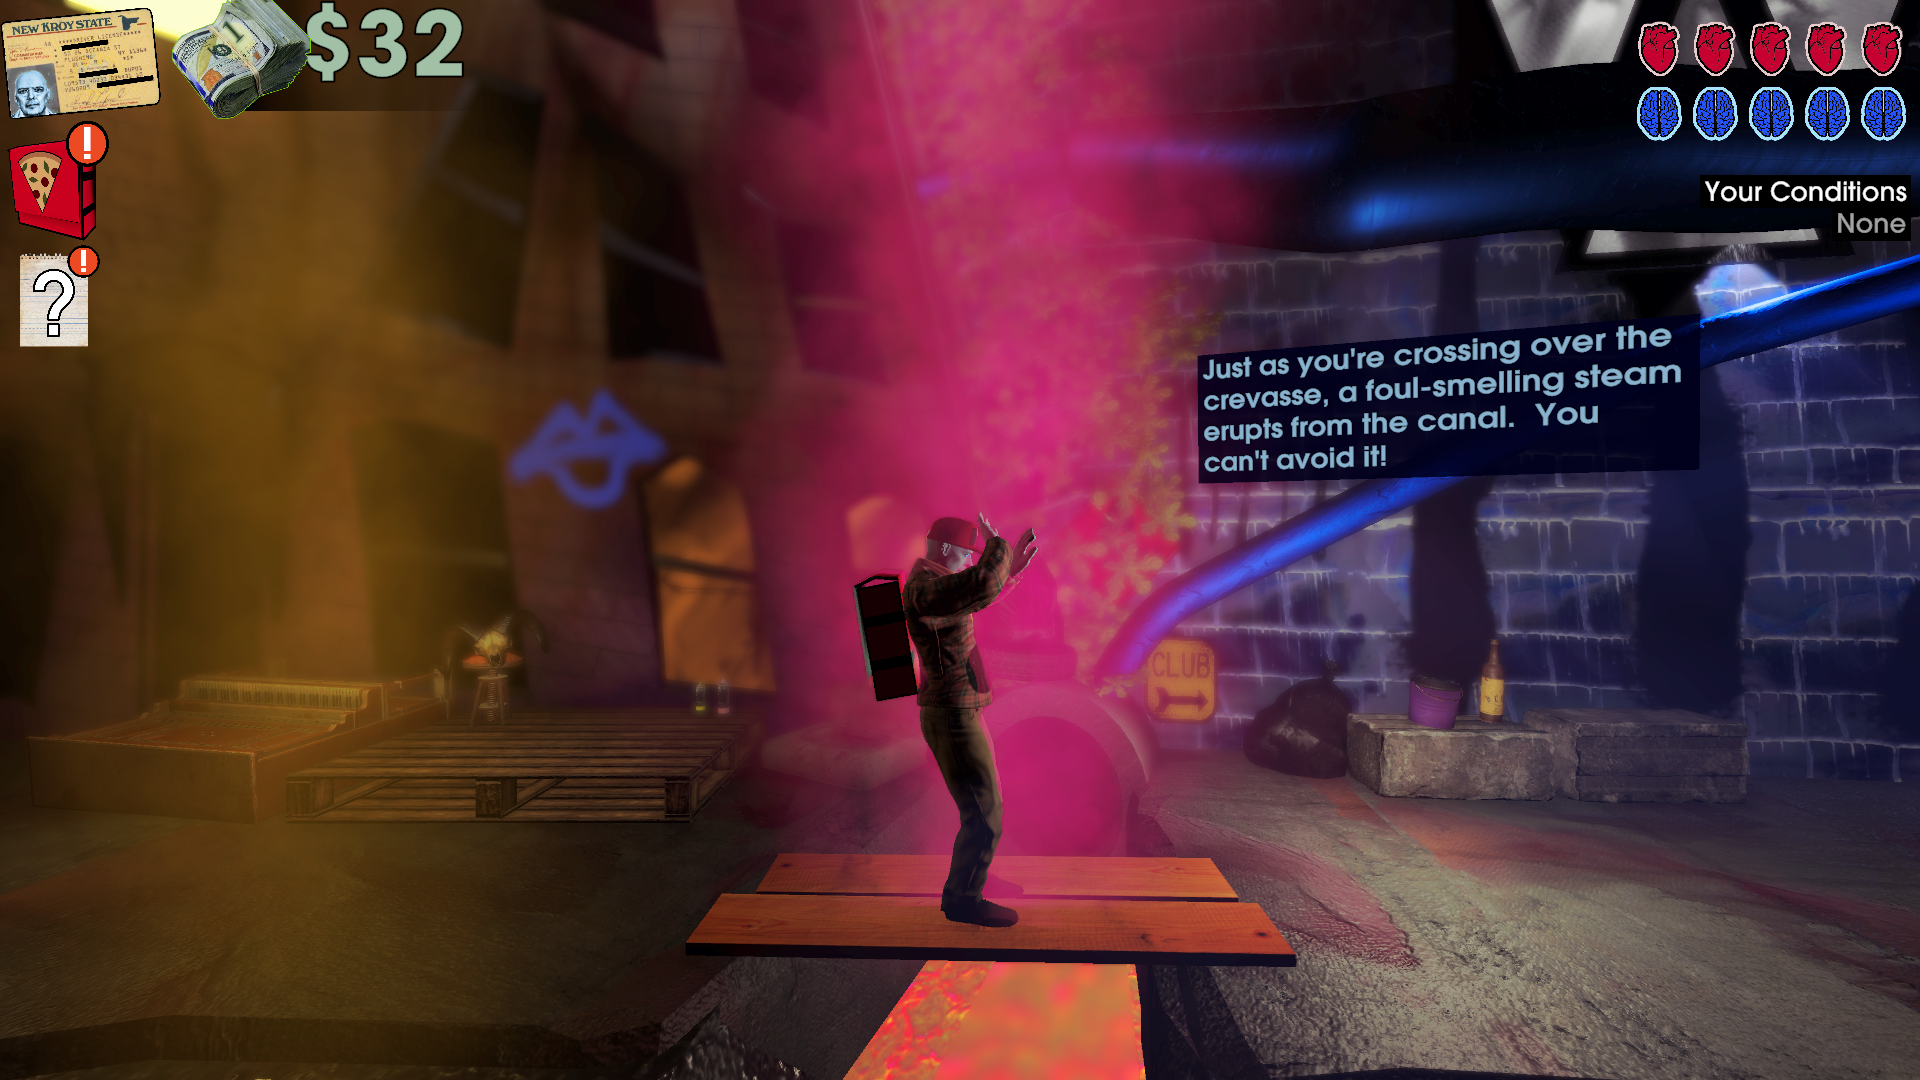 Screenshot of the player character encountering a smelly crevasse